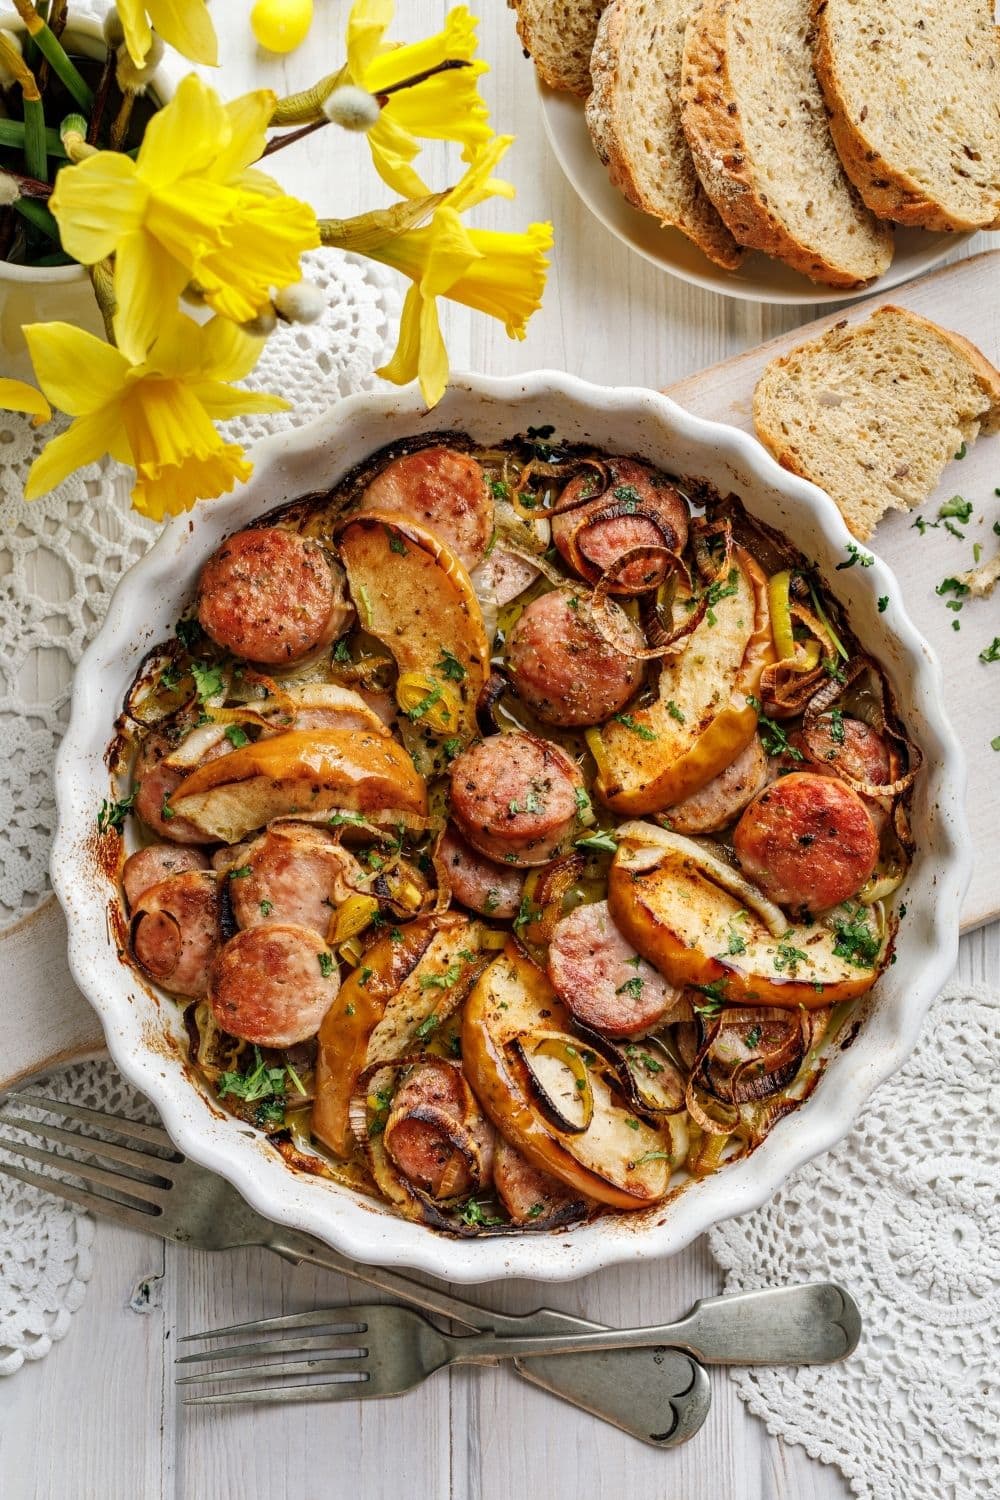 Sausage Casserole with Onion, Leek and Apples